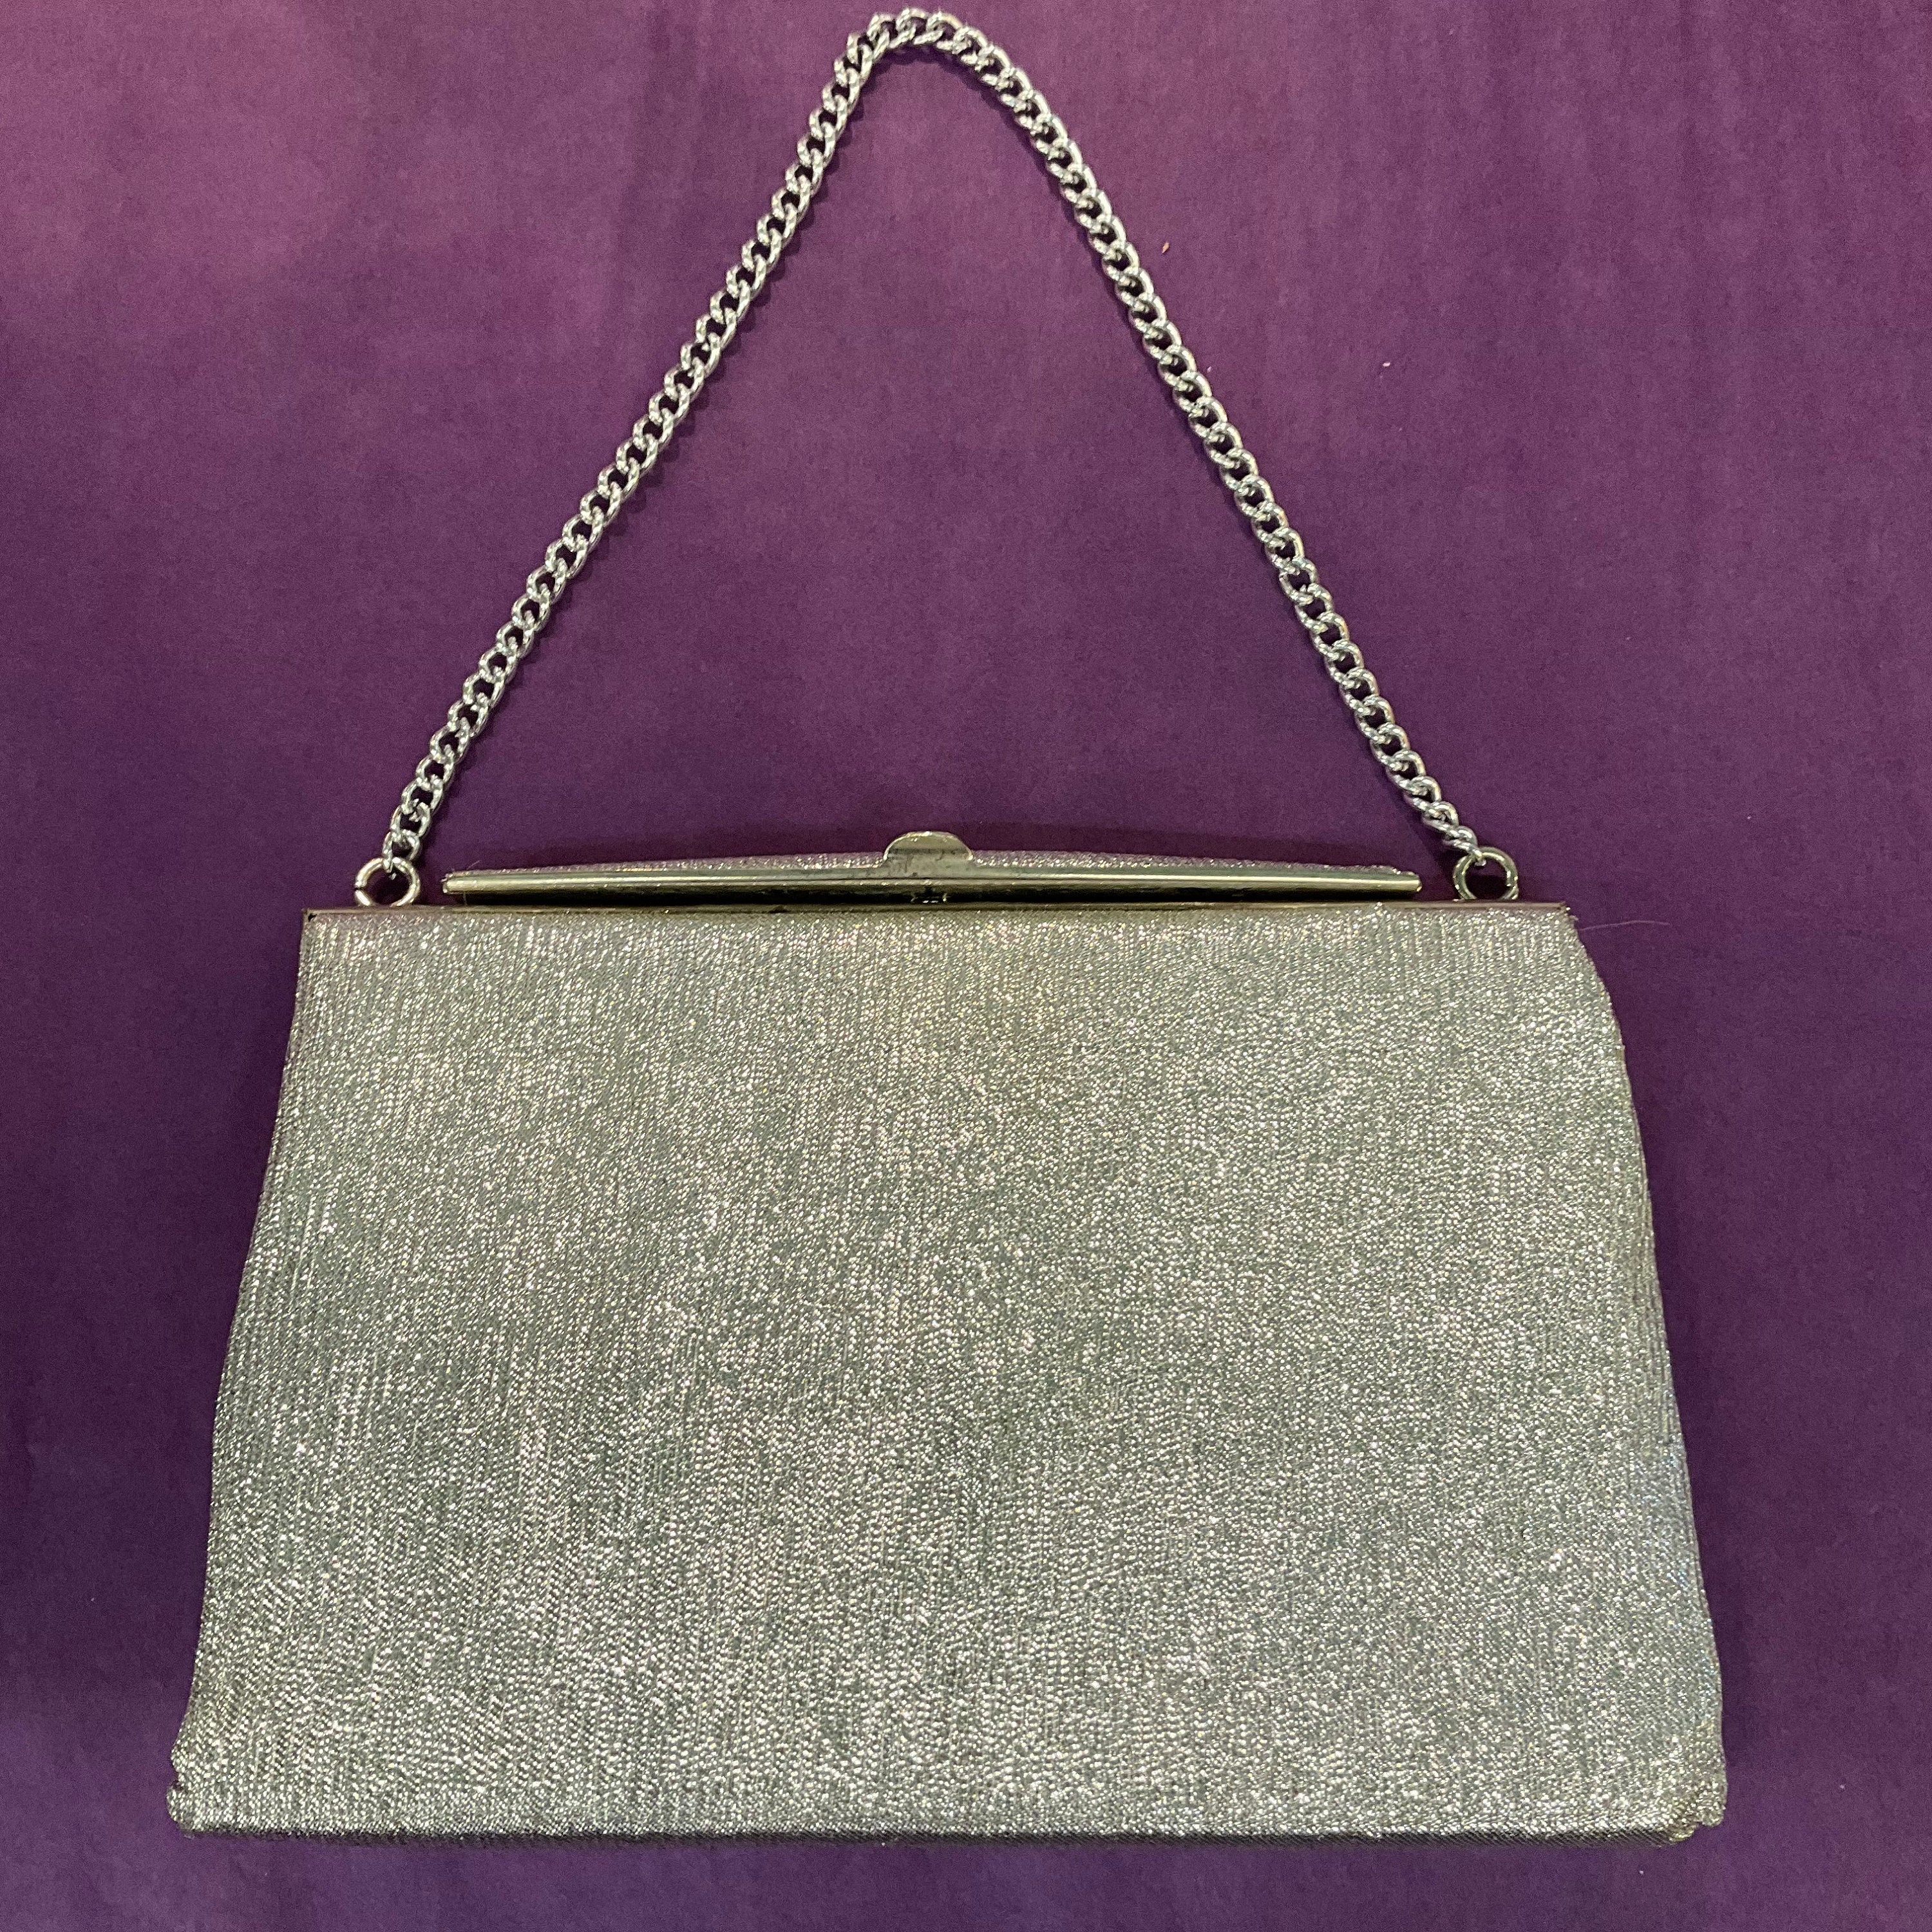 SWAGGER BAG SILVER  Prom clutch bags, Sparkly purse, Silver clutch purse